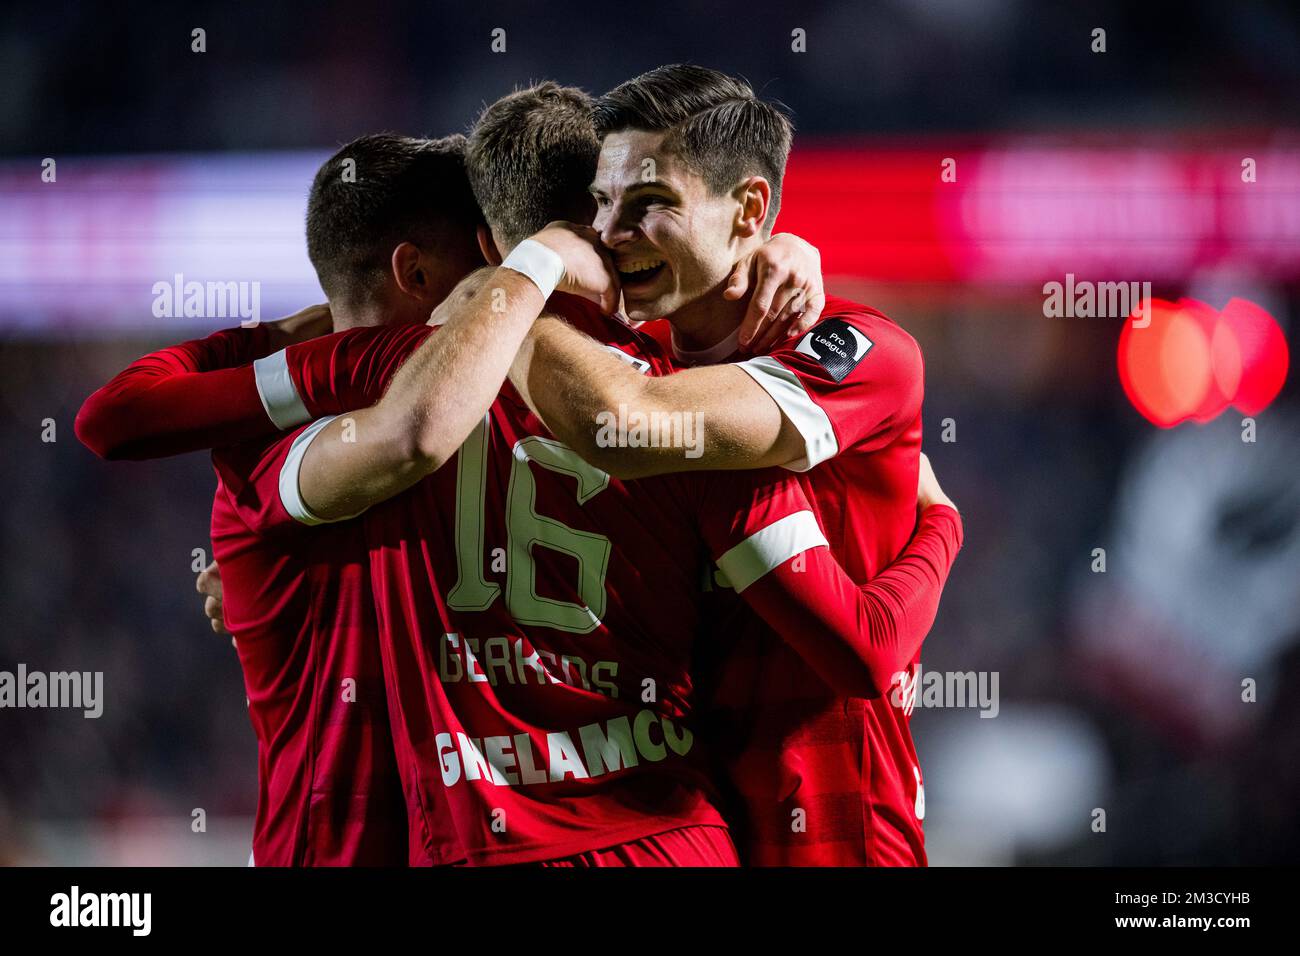 Antwerp's Pieter Gerkens celebrates after scoring during a soccer match between Royal Antwerp FC RAFC and Sint-Truiden STVV, Friday 07 October 2022 in Antwerp, a match on day 11 of the 2022-2023 'Jupiler Pro League' first division of the Belgian championship. BELGA PHOTO JASPER JACOBS Stock Photo